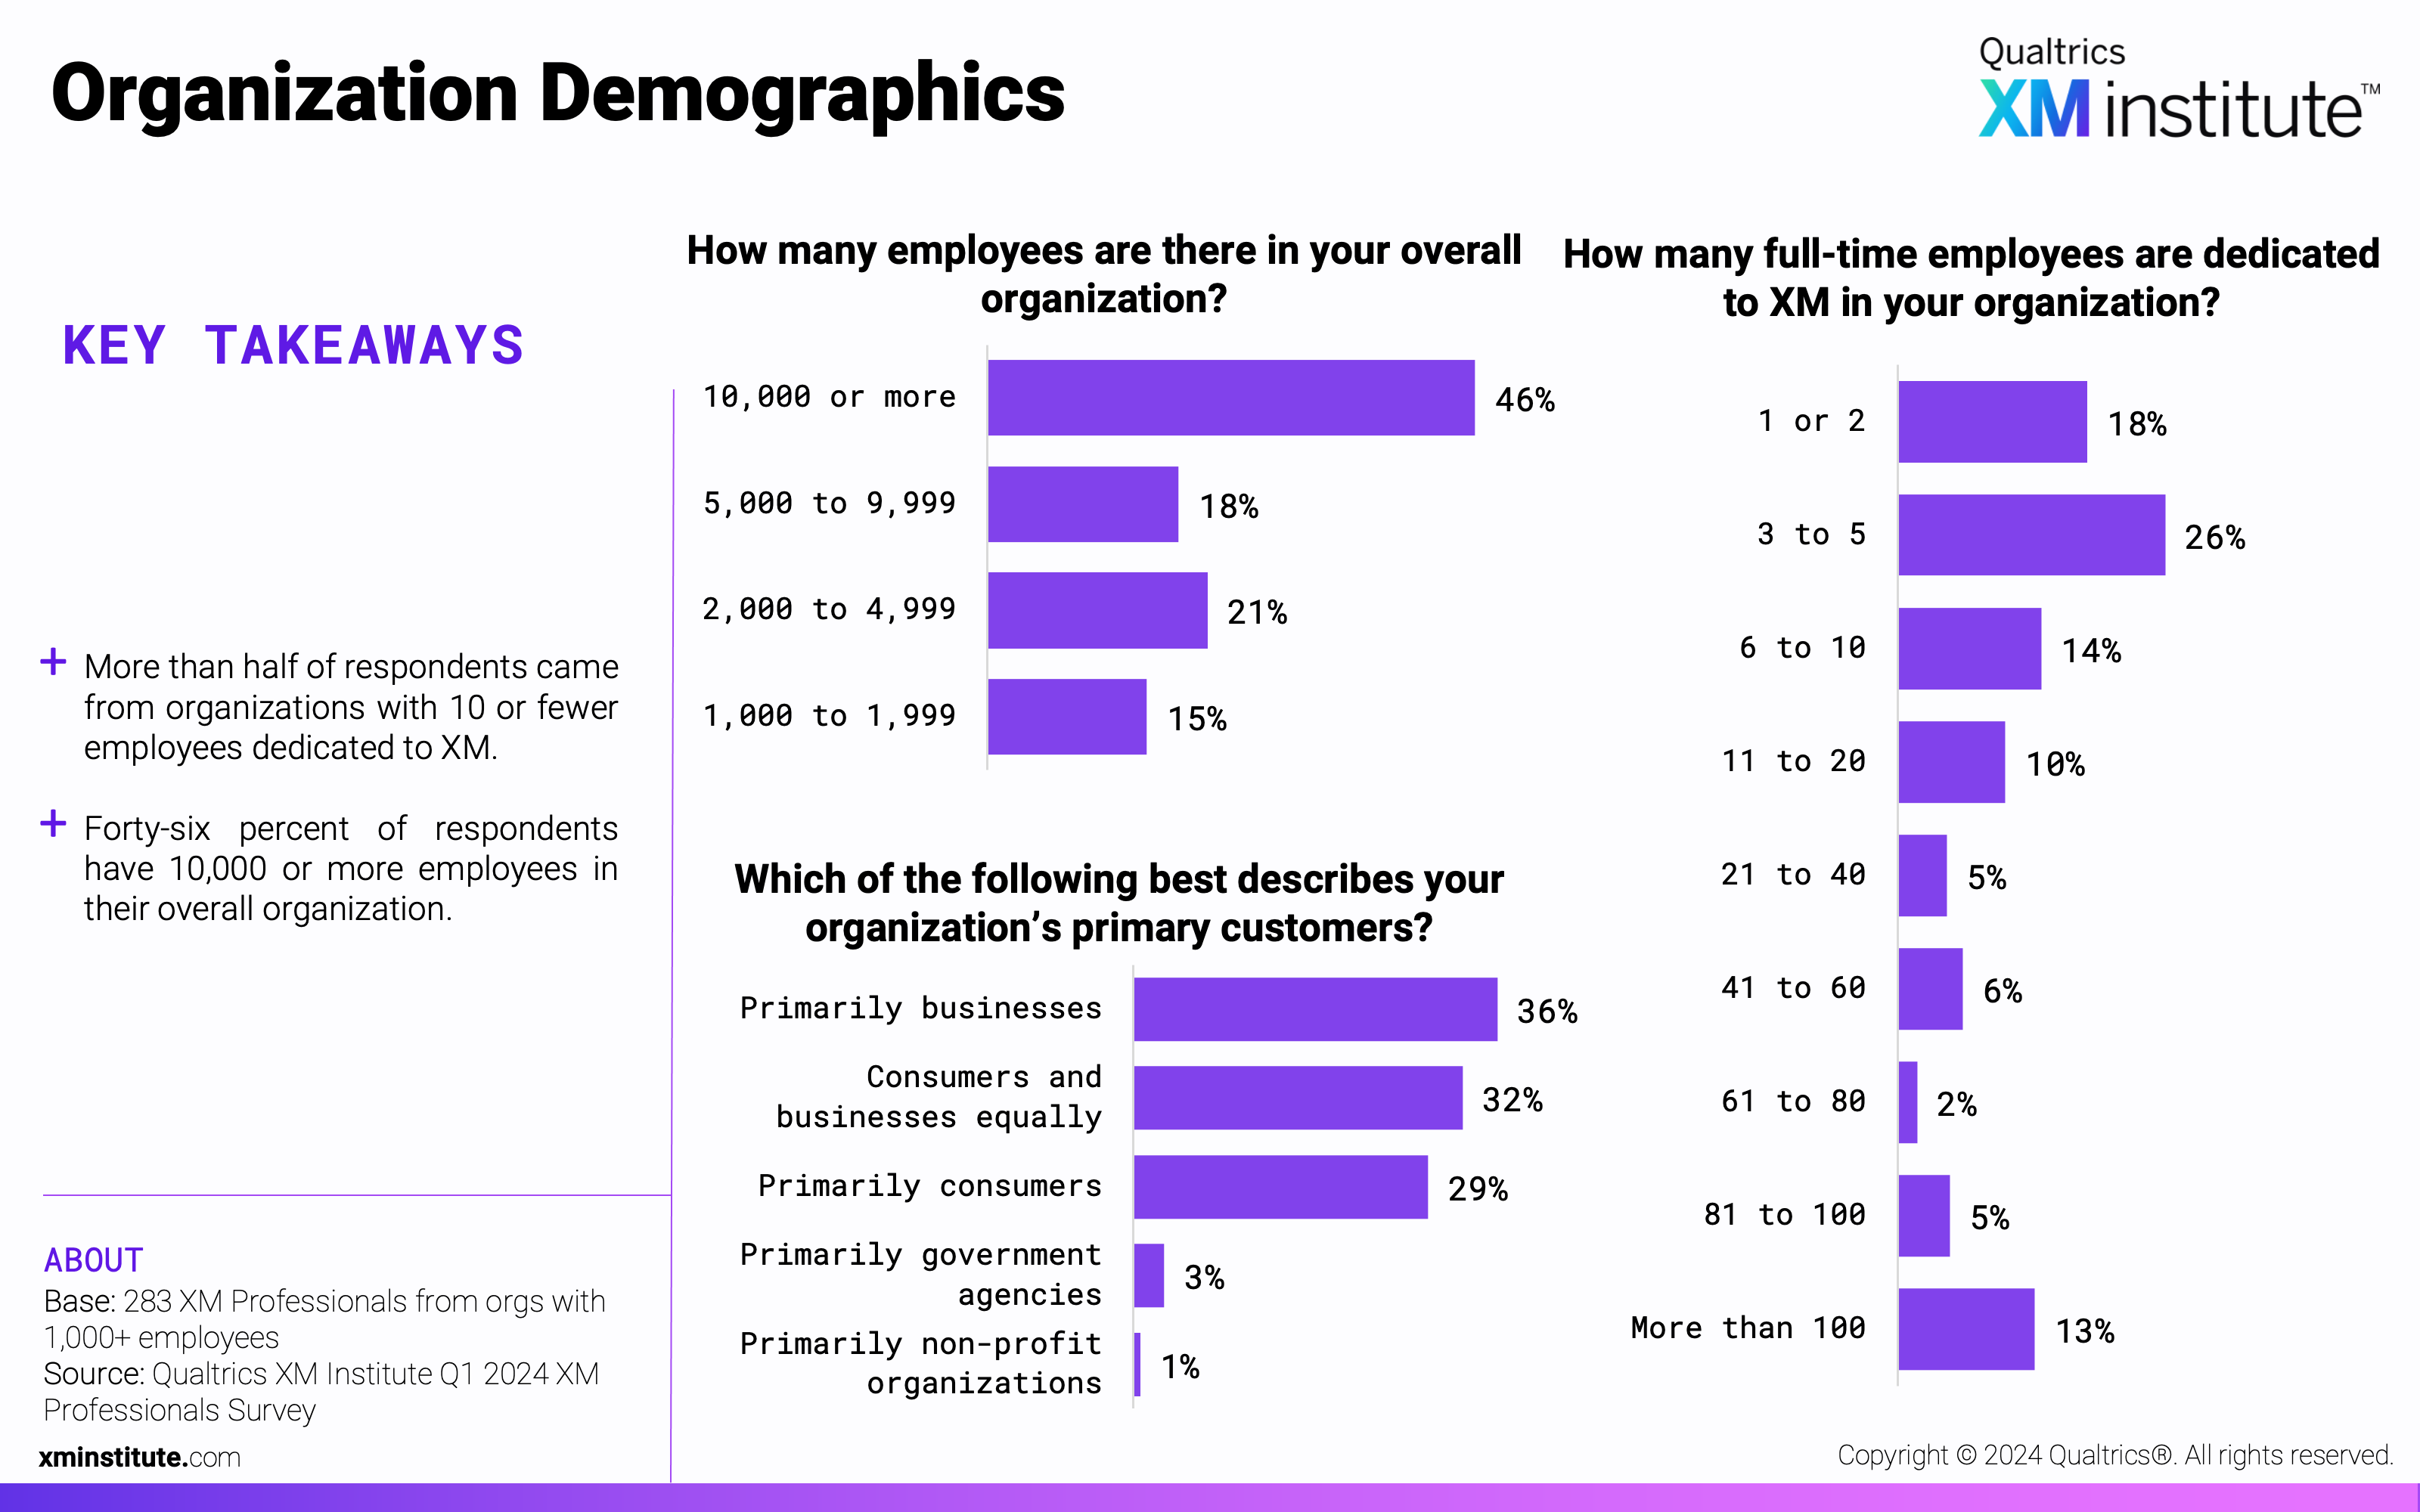 These charts show the number of employees in respondents' organizations, who their primary customers are, and how many full-time employees are dedicated to XM in their organization. 